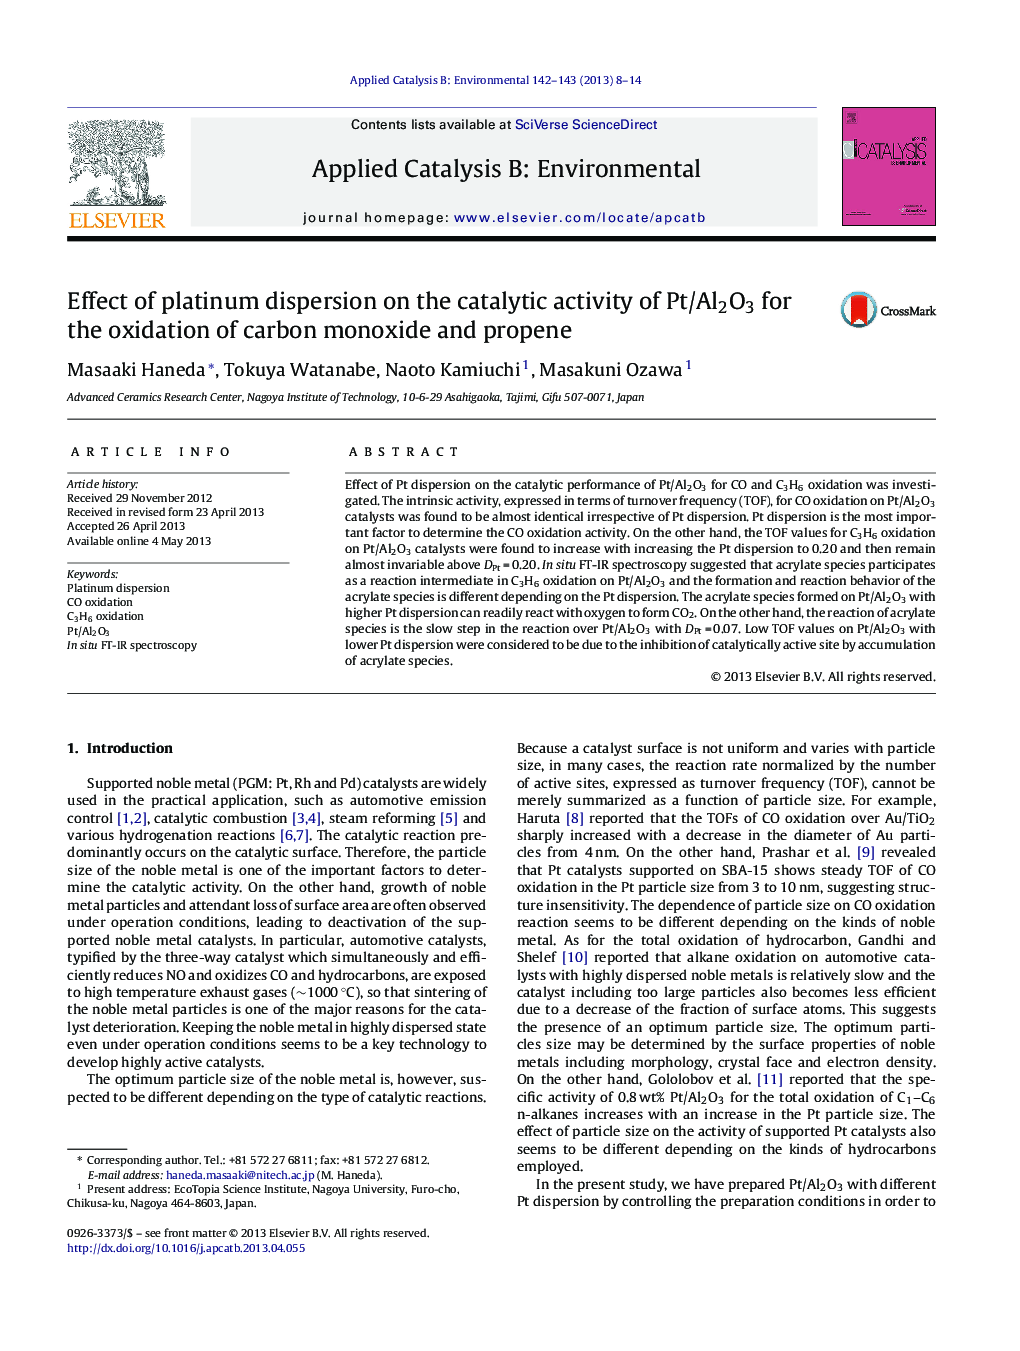 Effect of platinum dispersion on the catalytic activity of Pt/Al2O3 for the oxidation of carbon monoxide and propene